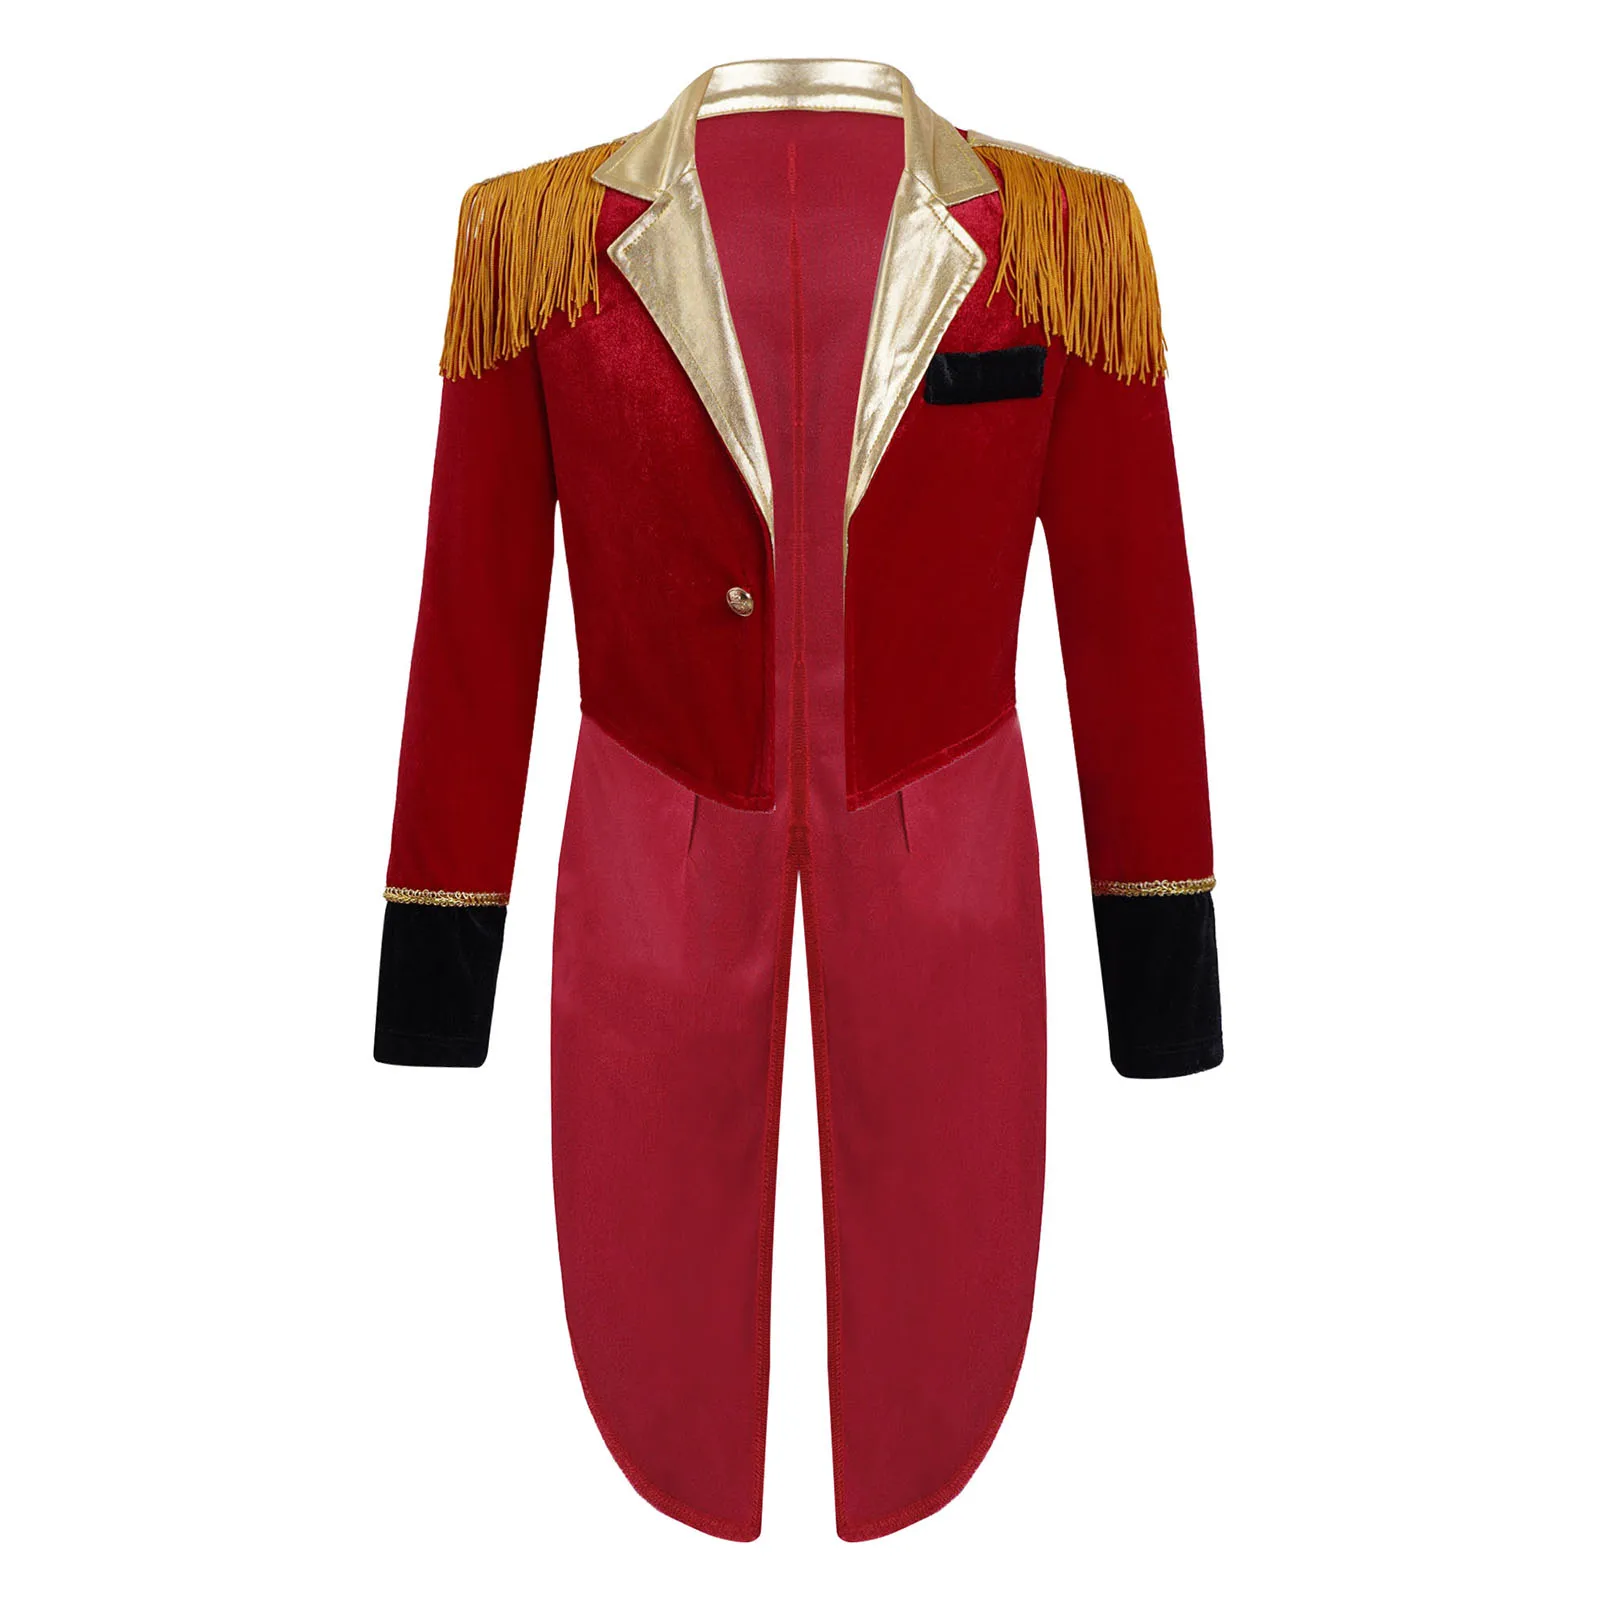 Kids Boy Circus Ringmaster Costumes Lapel Collar Tailcoat Jacket Tuxedo Coat Outfit Long Sleeves Tassels Showman Cosplay Uniform Anime Costumes